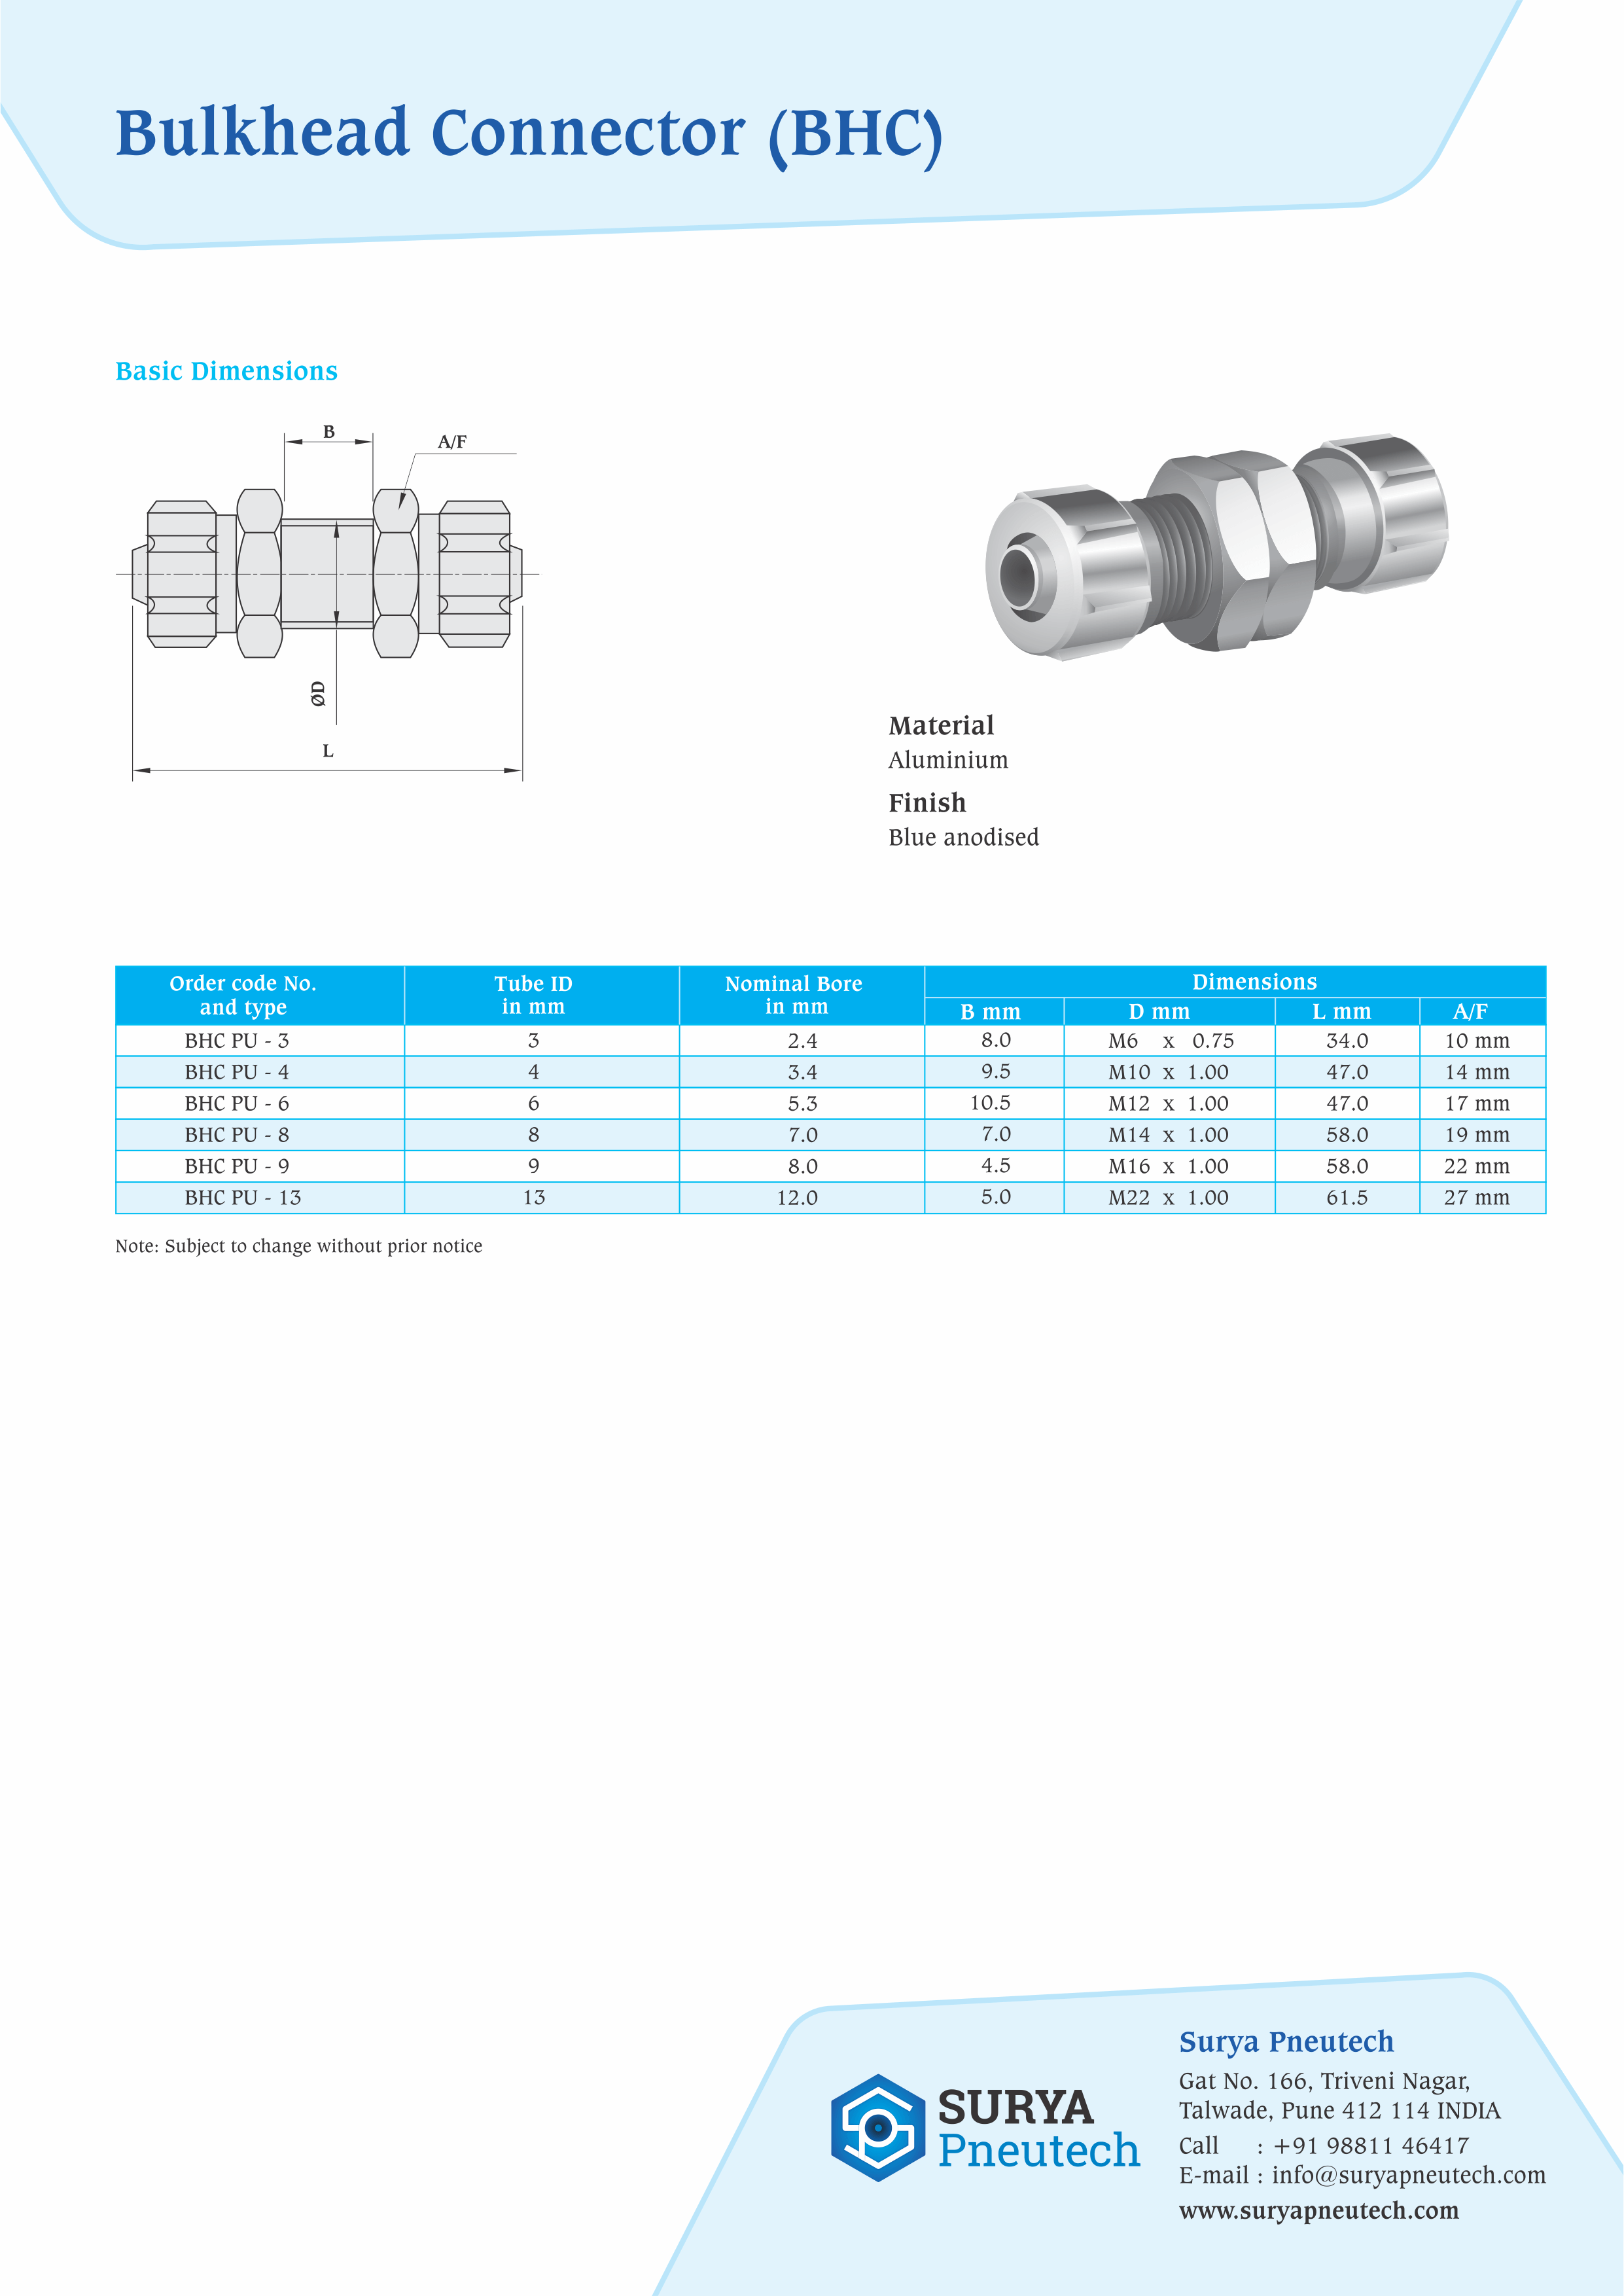 Bulkhead Connector Manufacturer in India